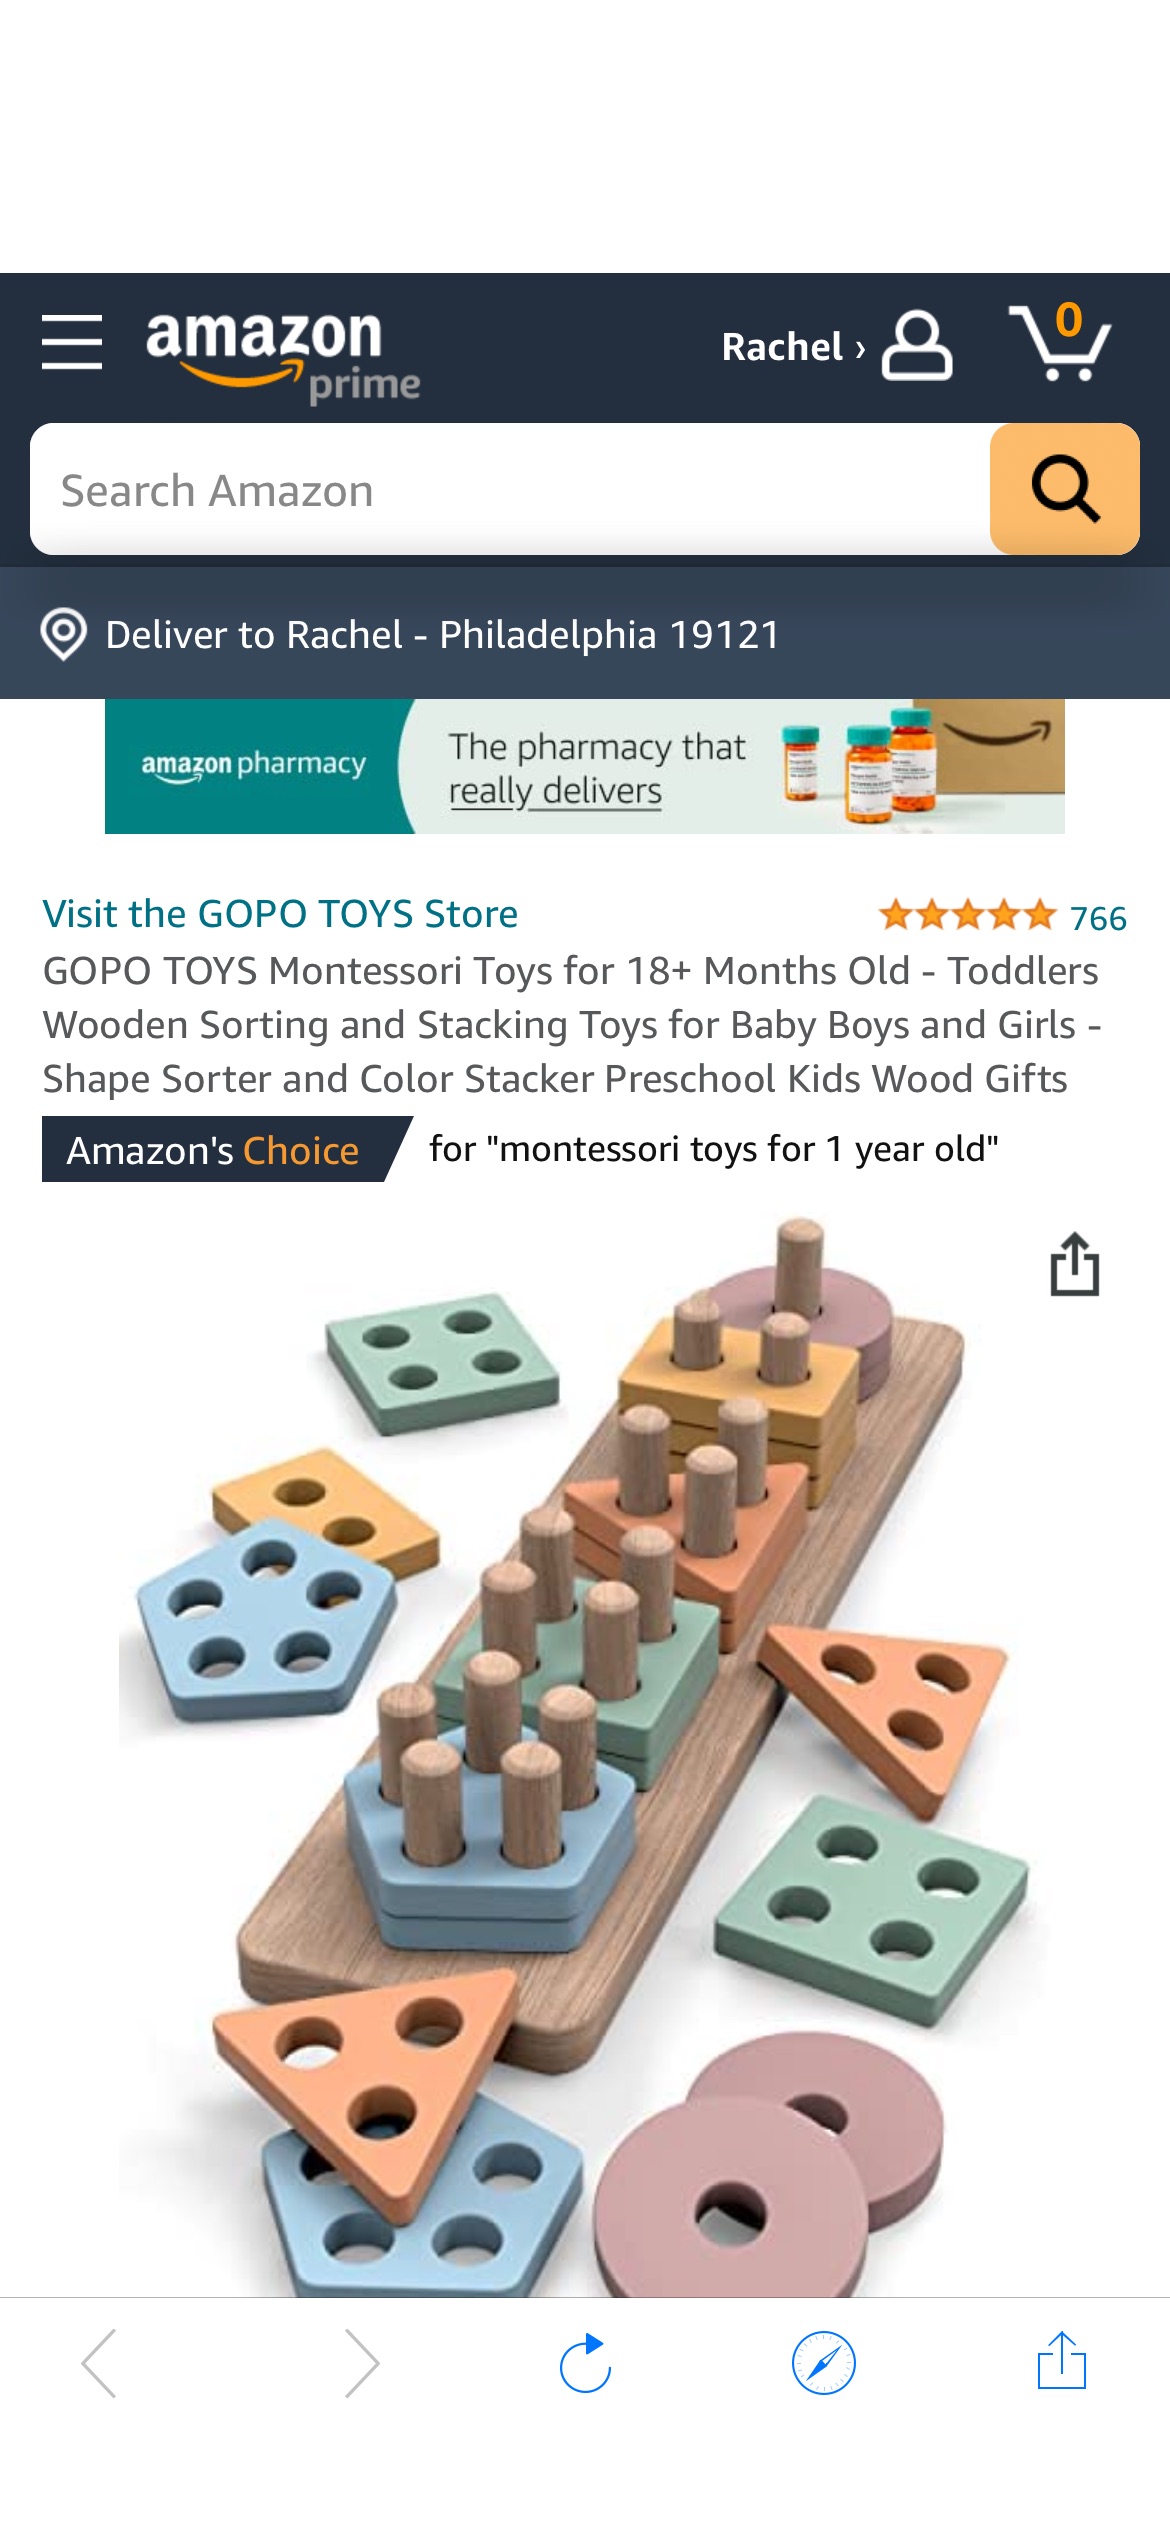 Amazon.com: GOPO TOYS Montessori Toys for 18+ Months Old - Toddlers Wooden Sorting and Stacking Toys for Baby Boys and Girls Toys & Games